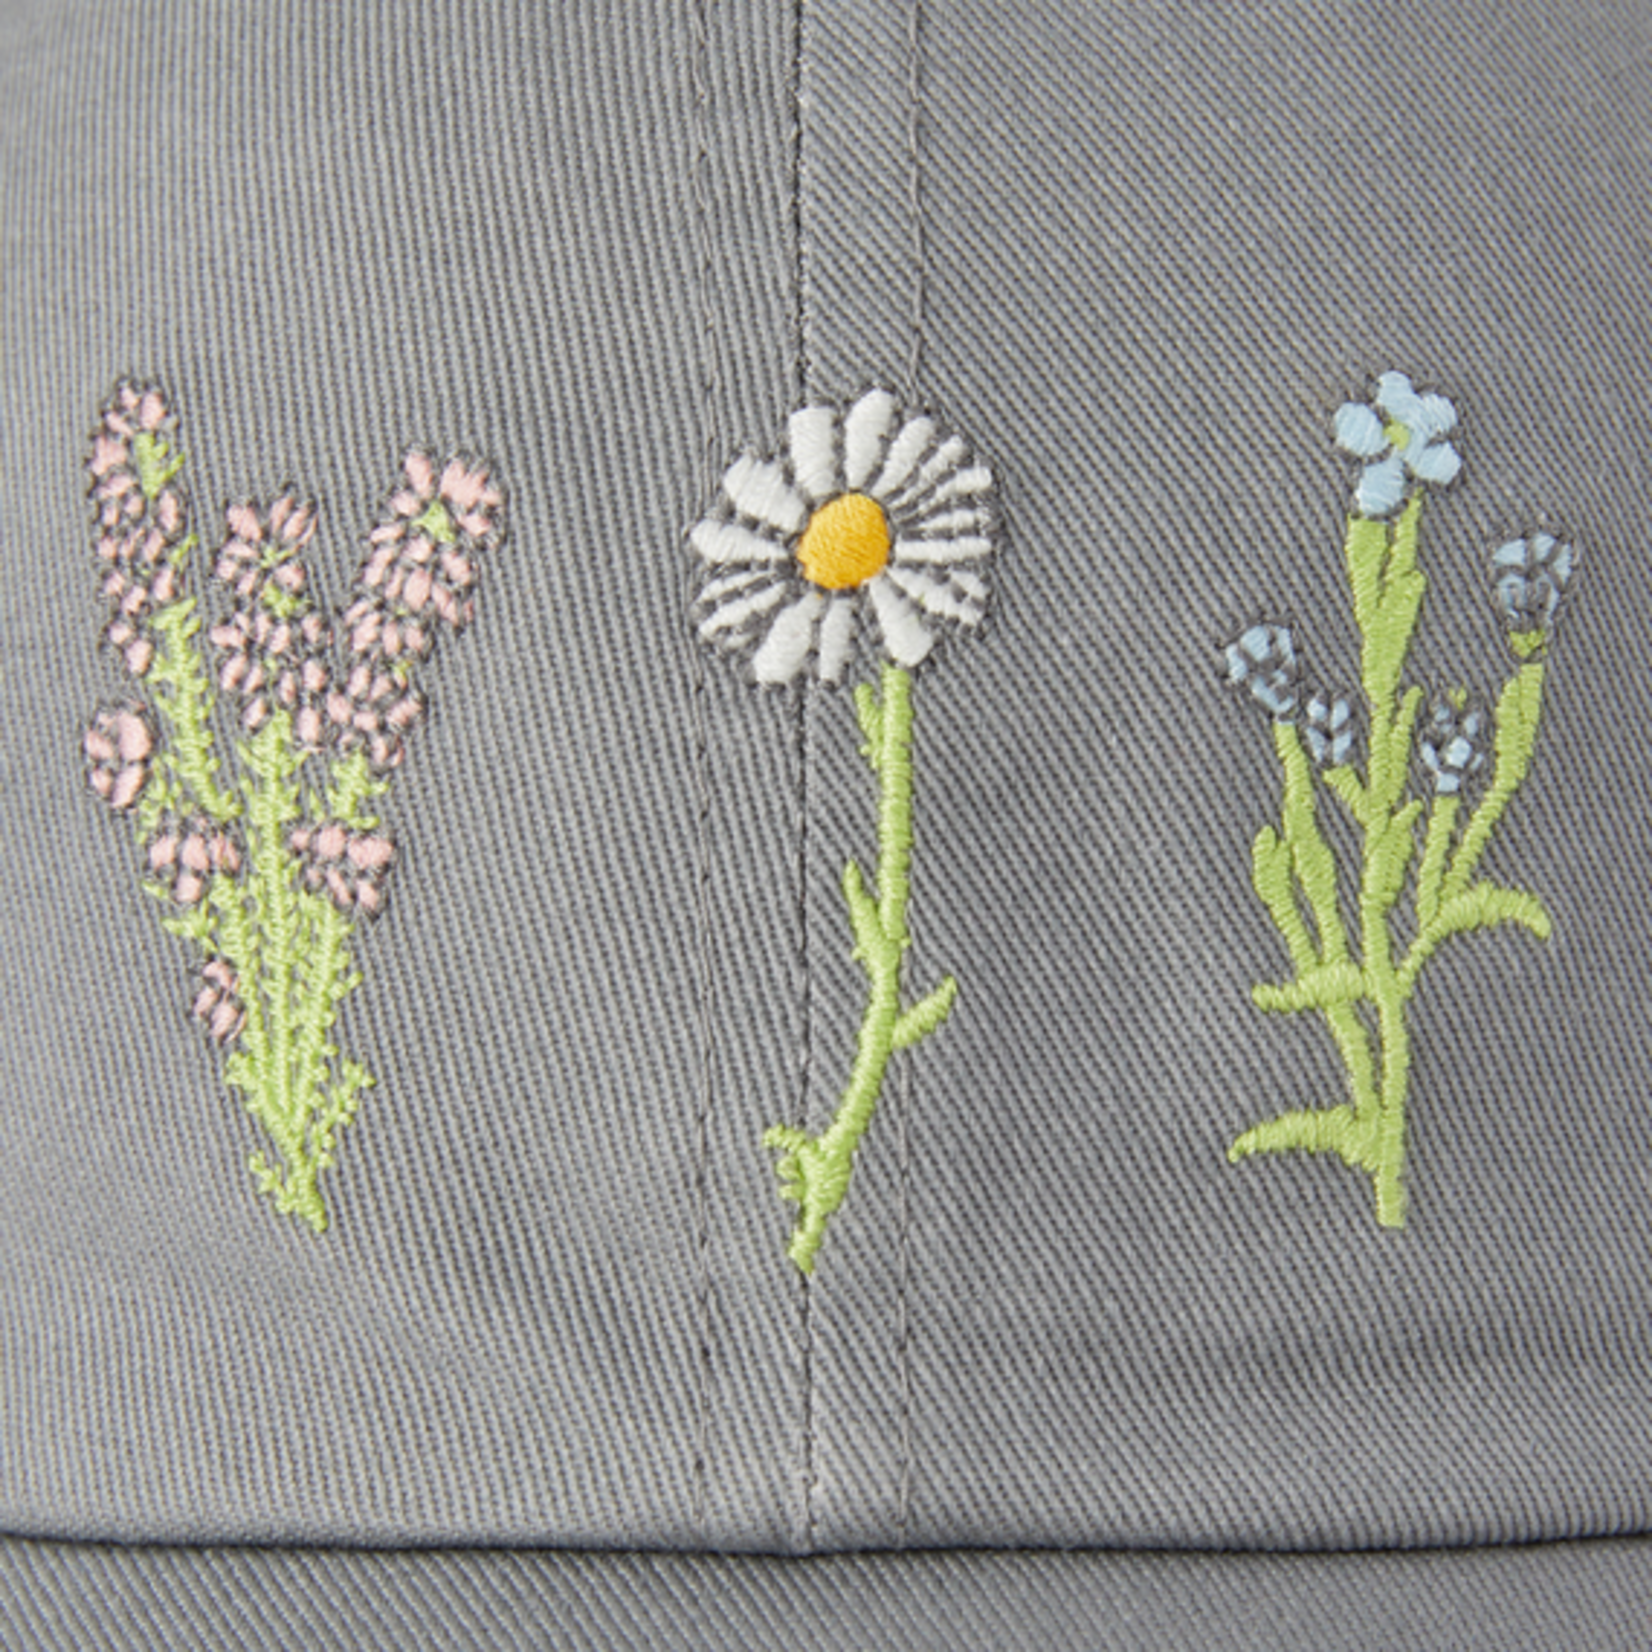 Life is Good Detailed Wildflowers Chill Cap